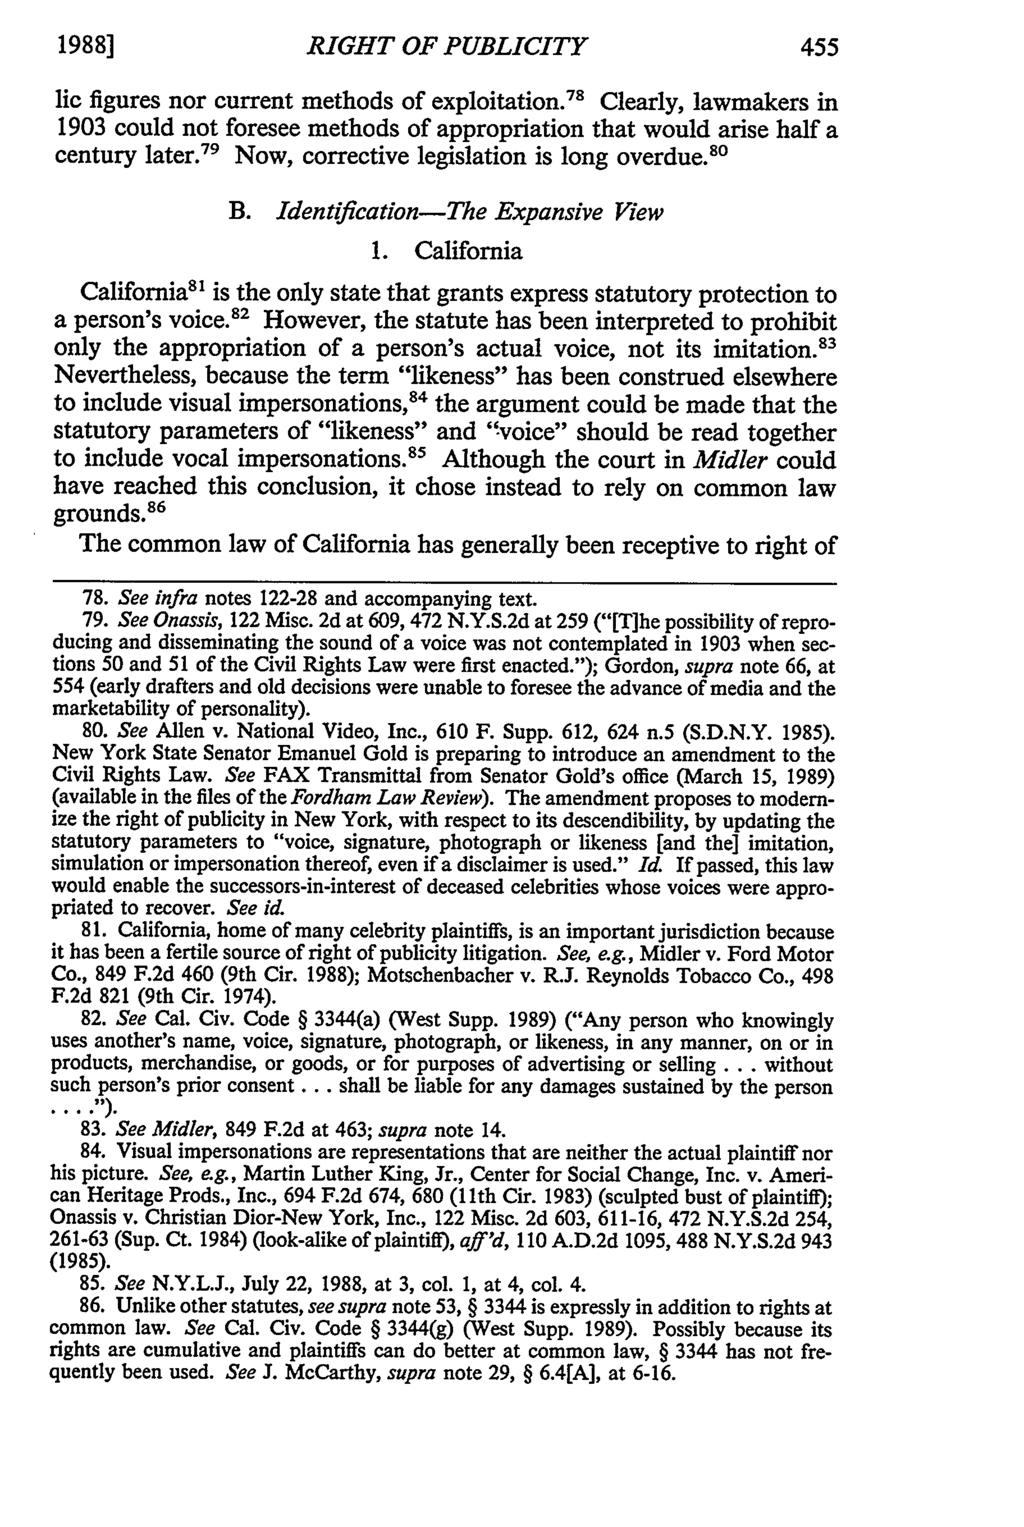 1988] RIGHT OF PUBLICITY lie figures nor current methods of exploitation. 7 " Clearly, lawmakers in 1903 could not foresee methods of appropriation that would arise half a century later.